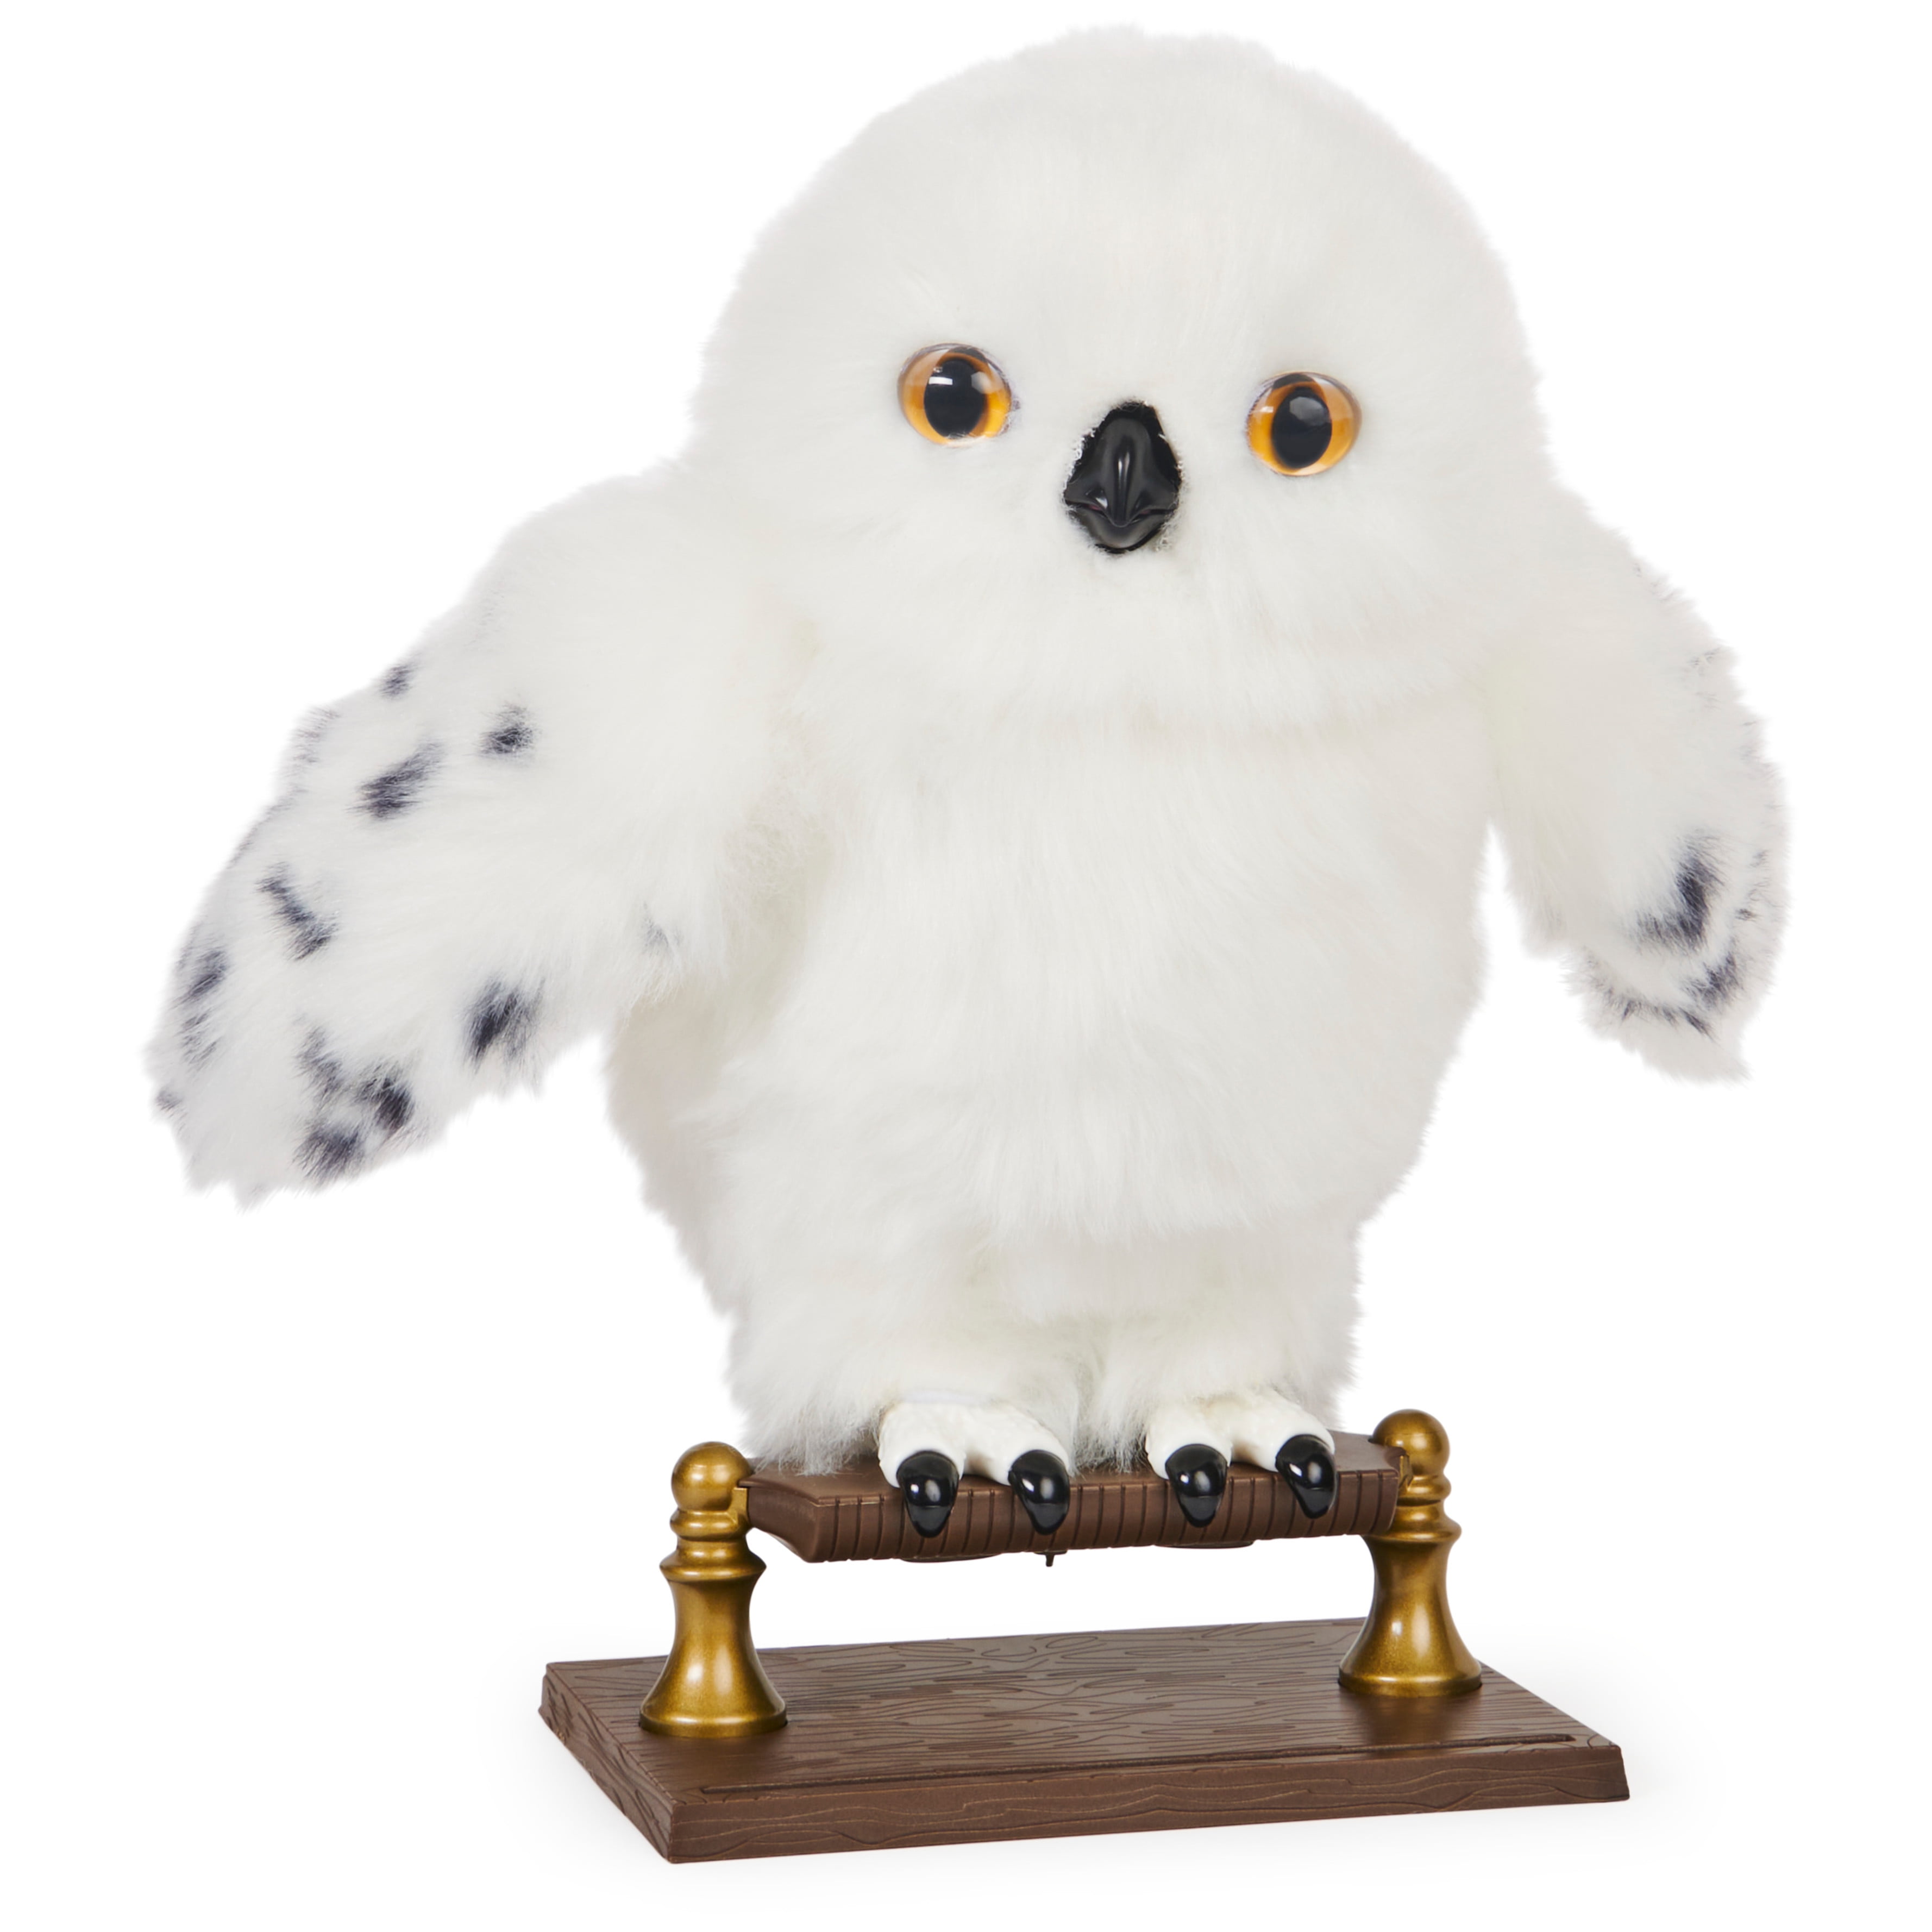 Hot OWL Sitting Harry potter's Owl Learning Resource Miniature Plush Stuffed Toy 